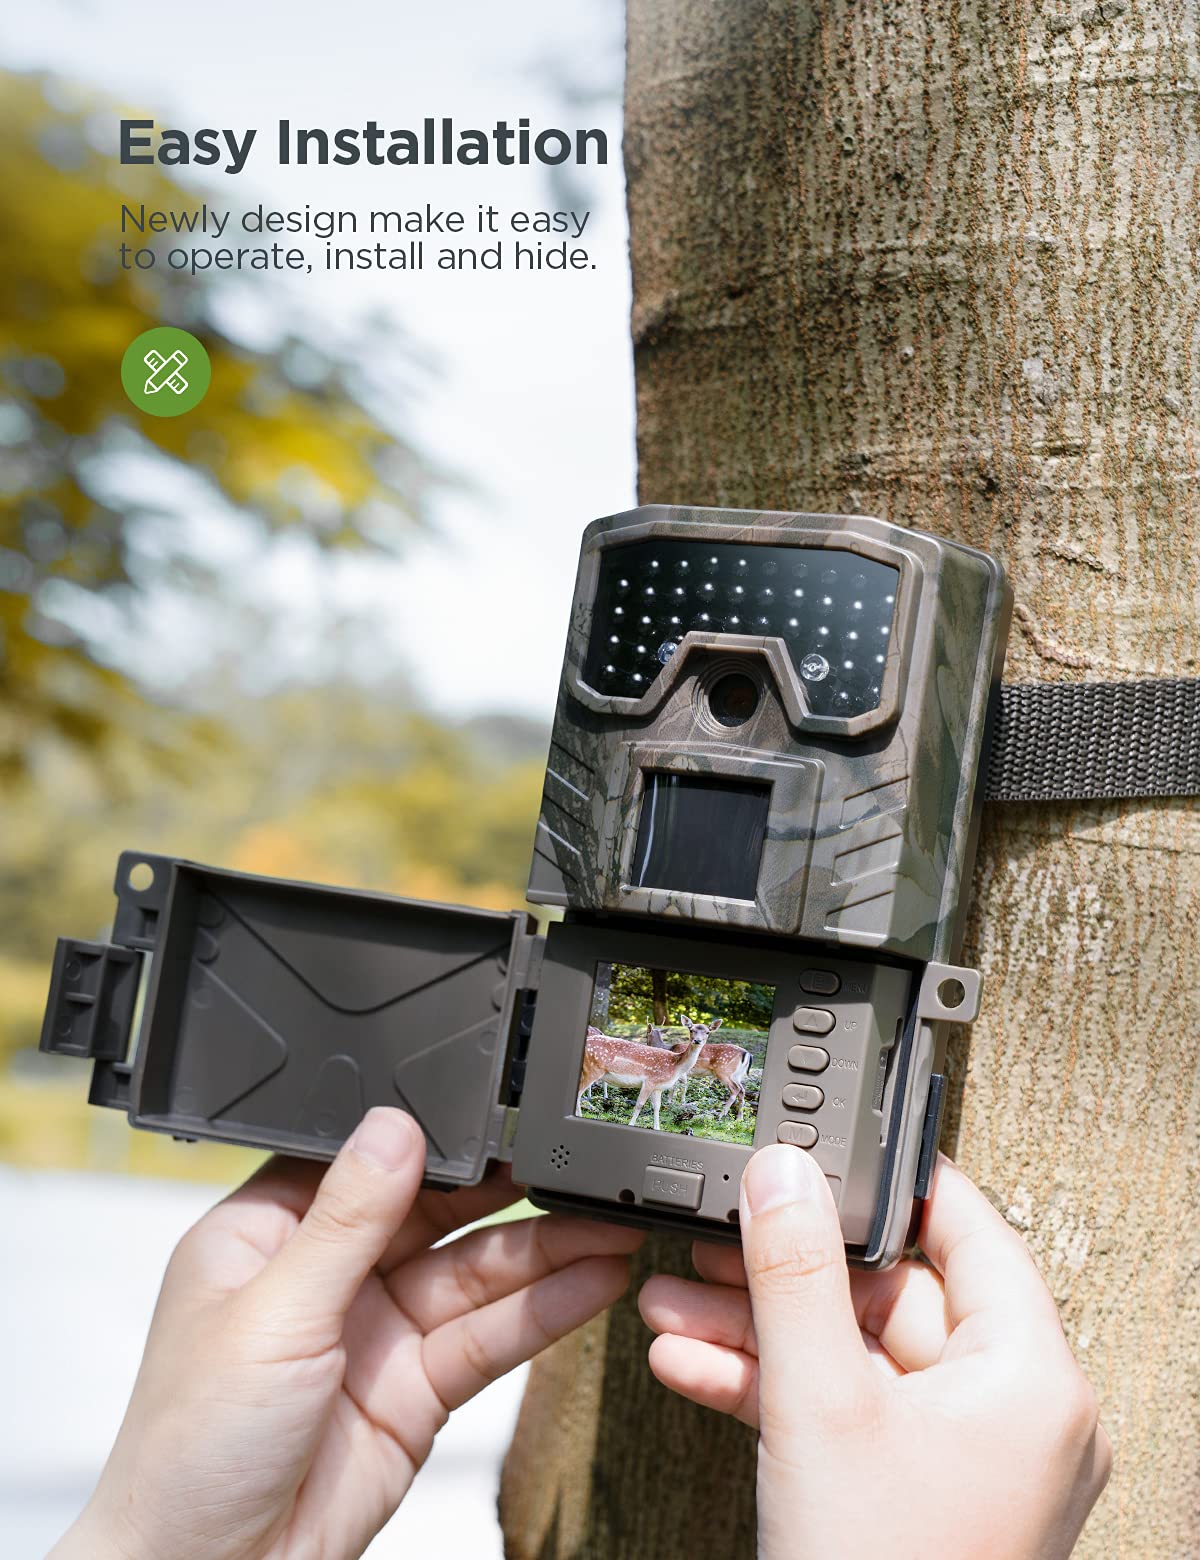 CEYOMUR Trail Camera, 20MP 1080P Hunting Camera with Low Glow IR LEDs Night Vision Motion Activated, Video Game Camera with IP66 Waterproof for Wildlife Monitoring